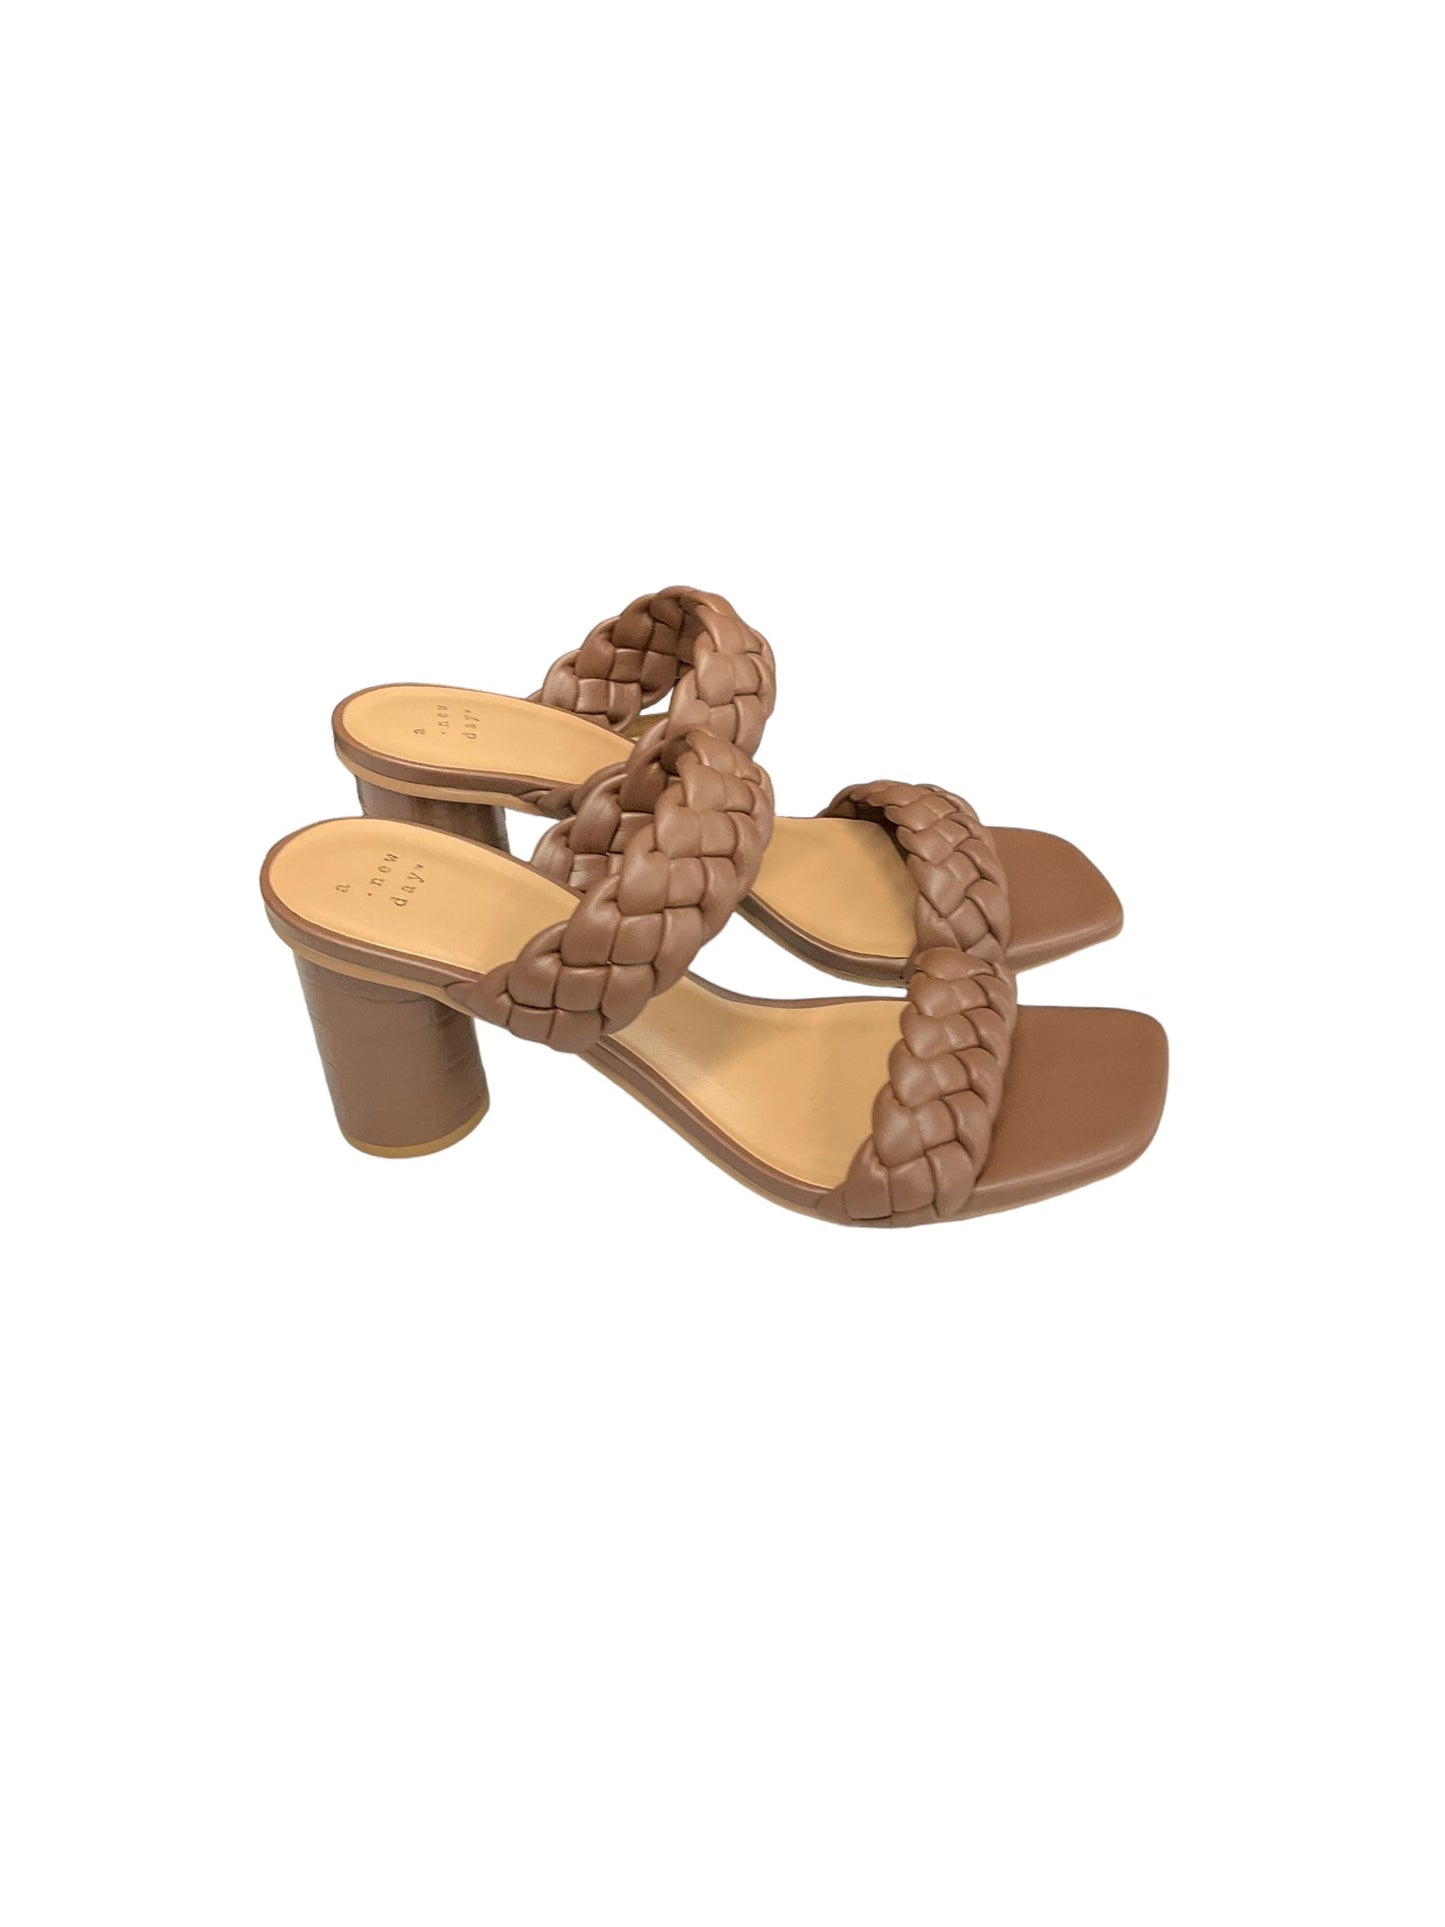 Brown Sandals Heels Block A New Day, Size 9